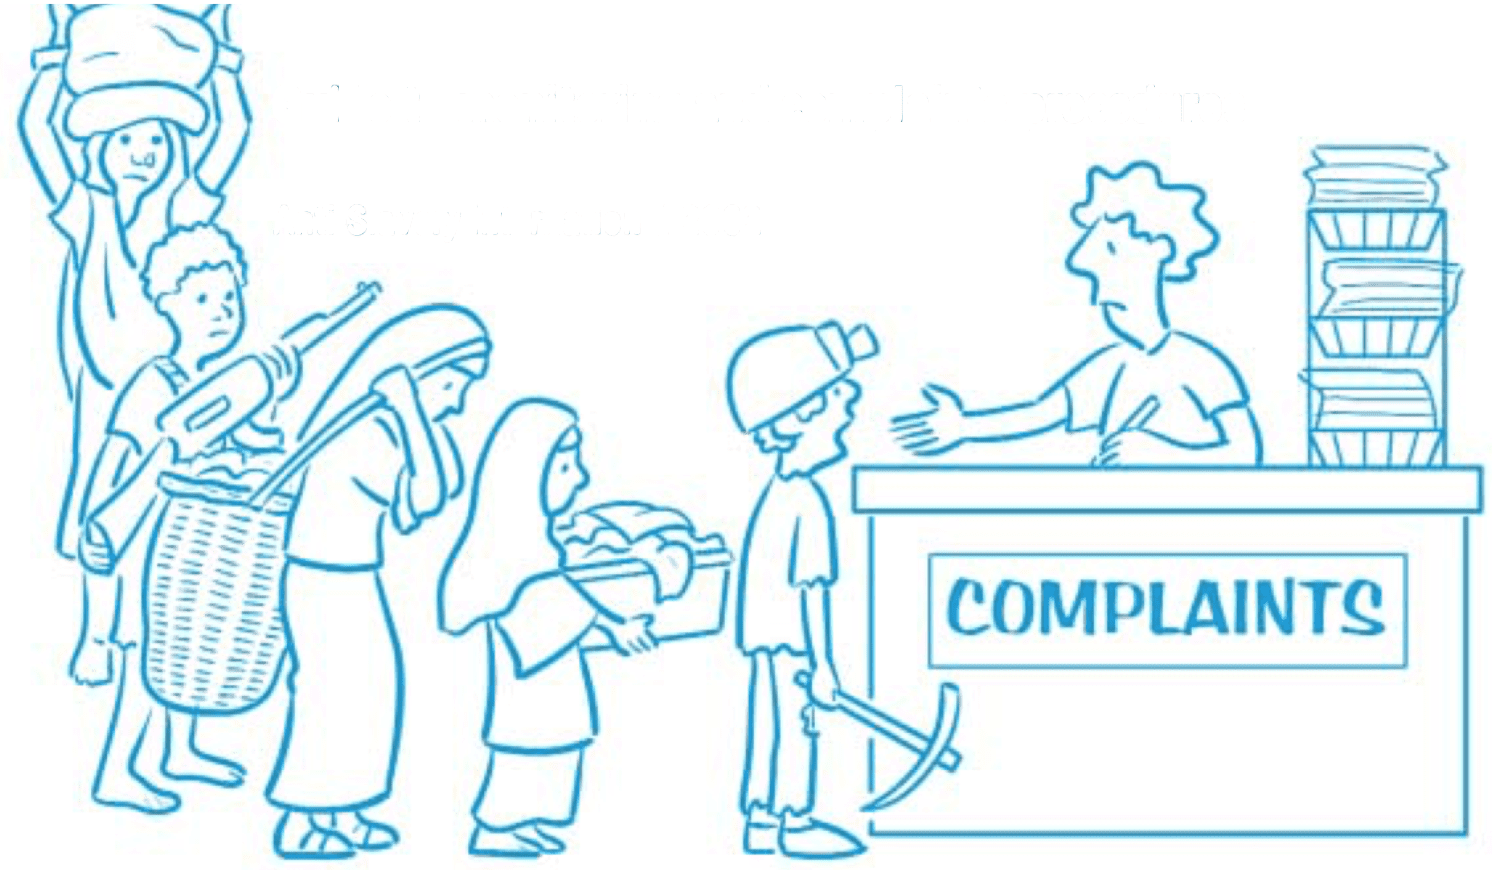 International Action Against Child Labour: Guide to monitoring and complaints procedures